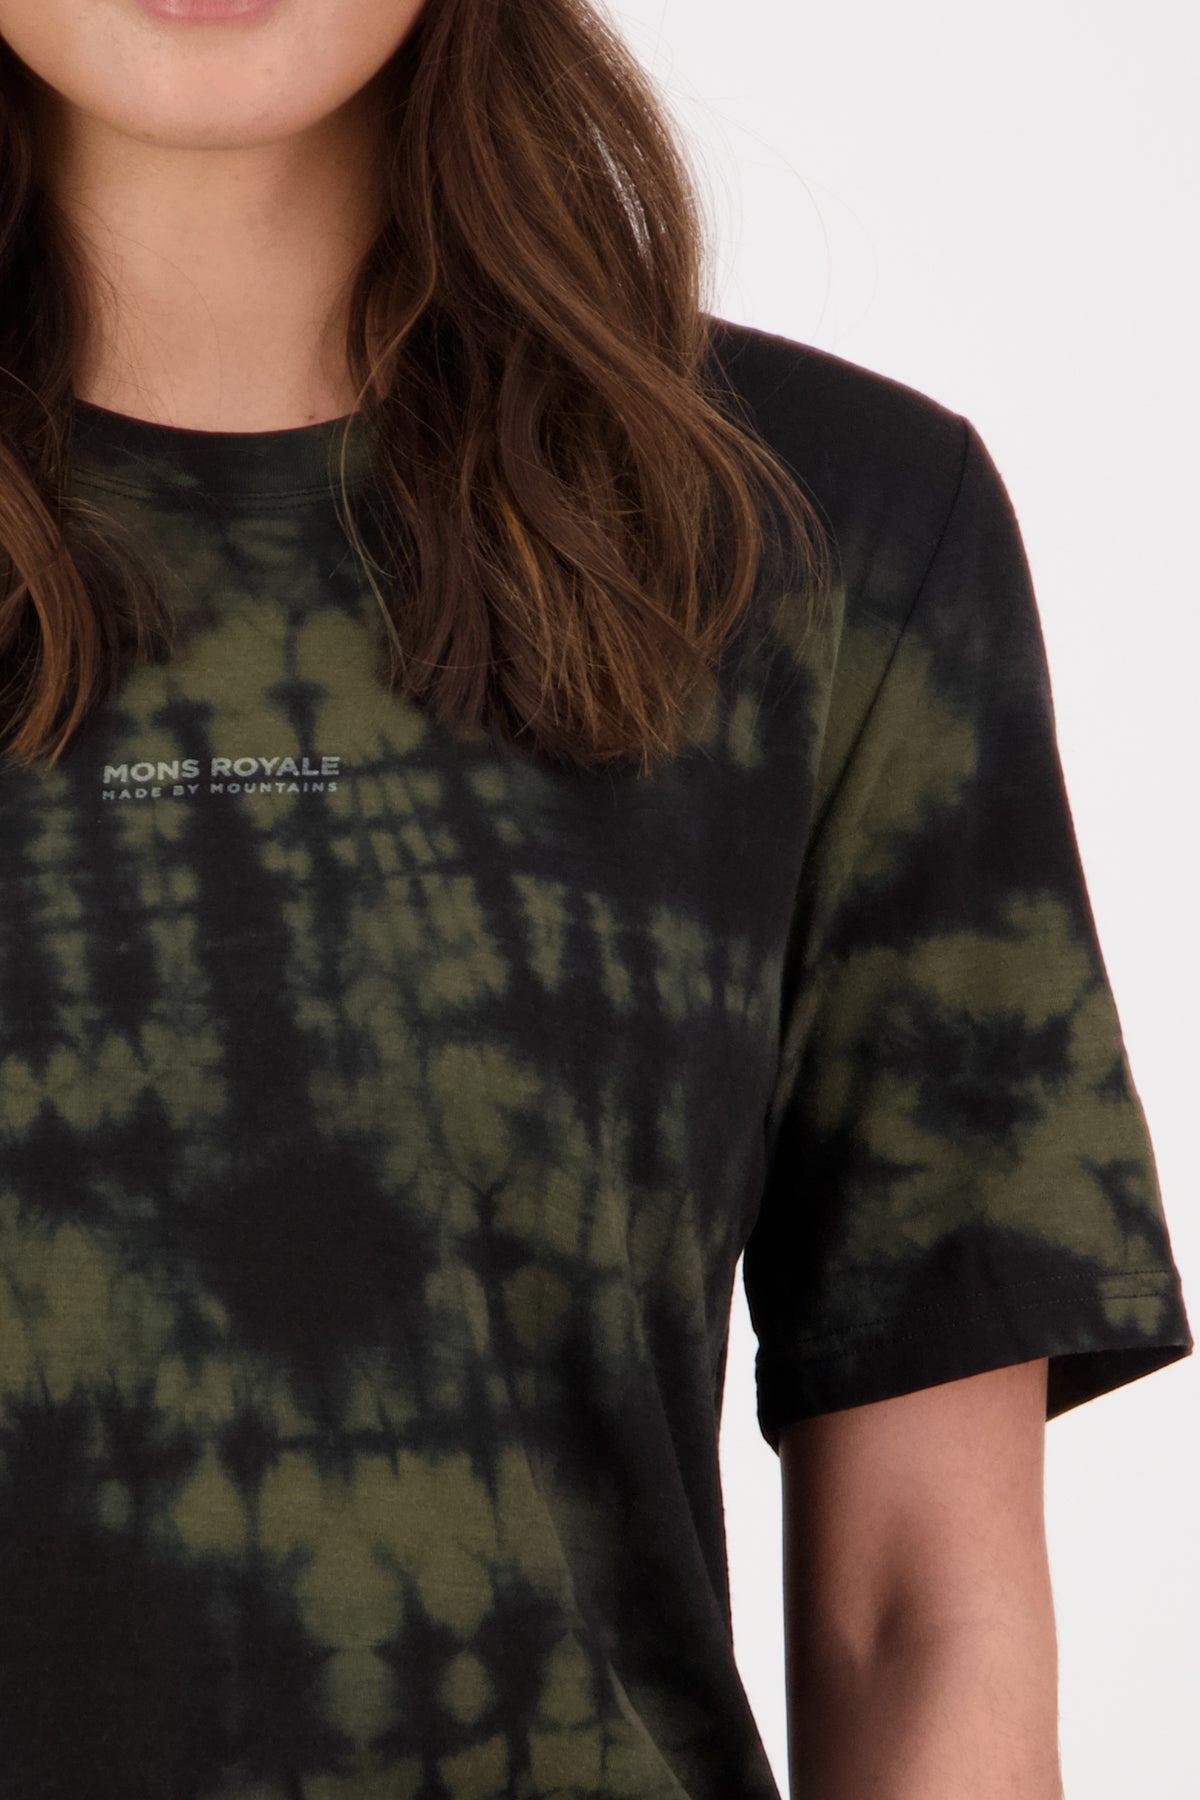 SS Mons Royale Womens Icon Relaxed Clean Olive Tie Dye - Genetik Sport